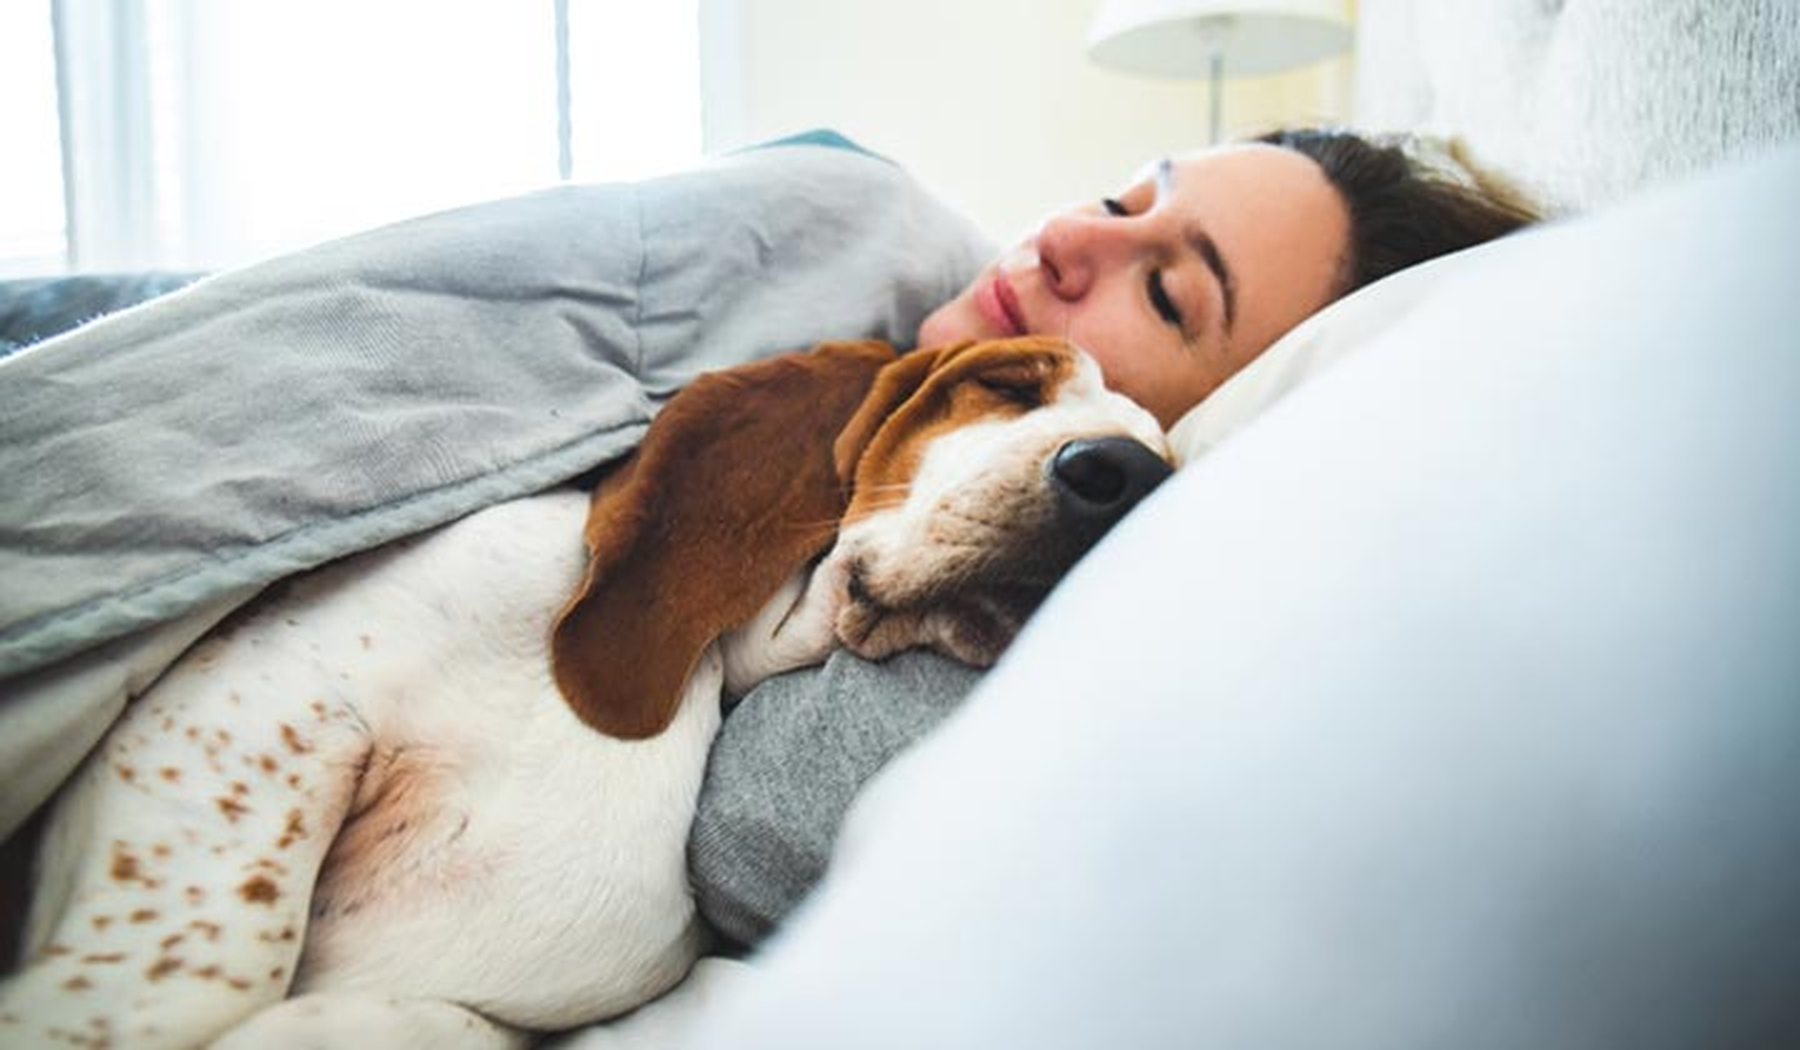 Woman and dog sleeping together in a bed